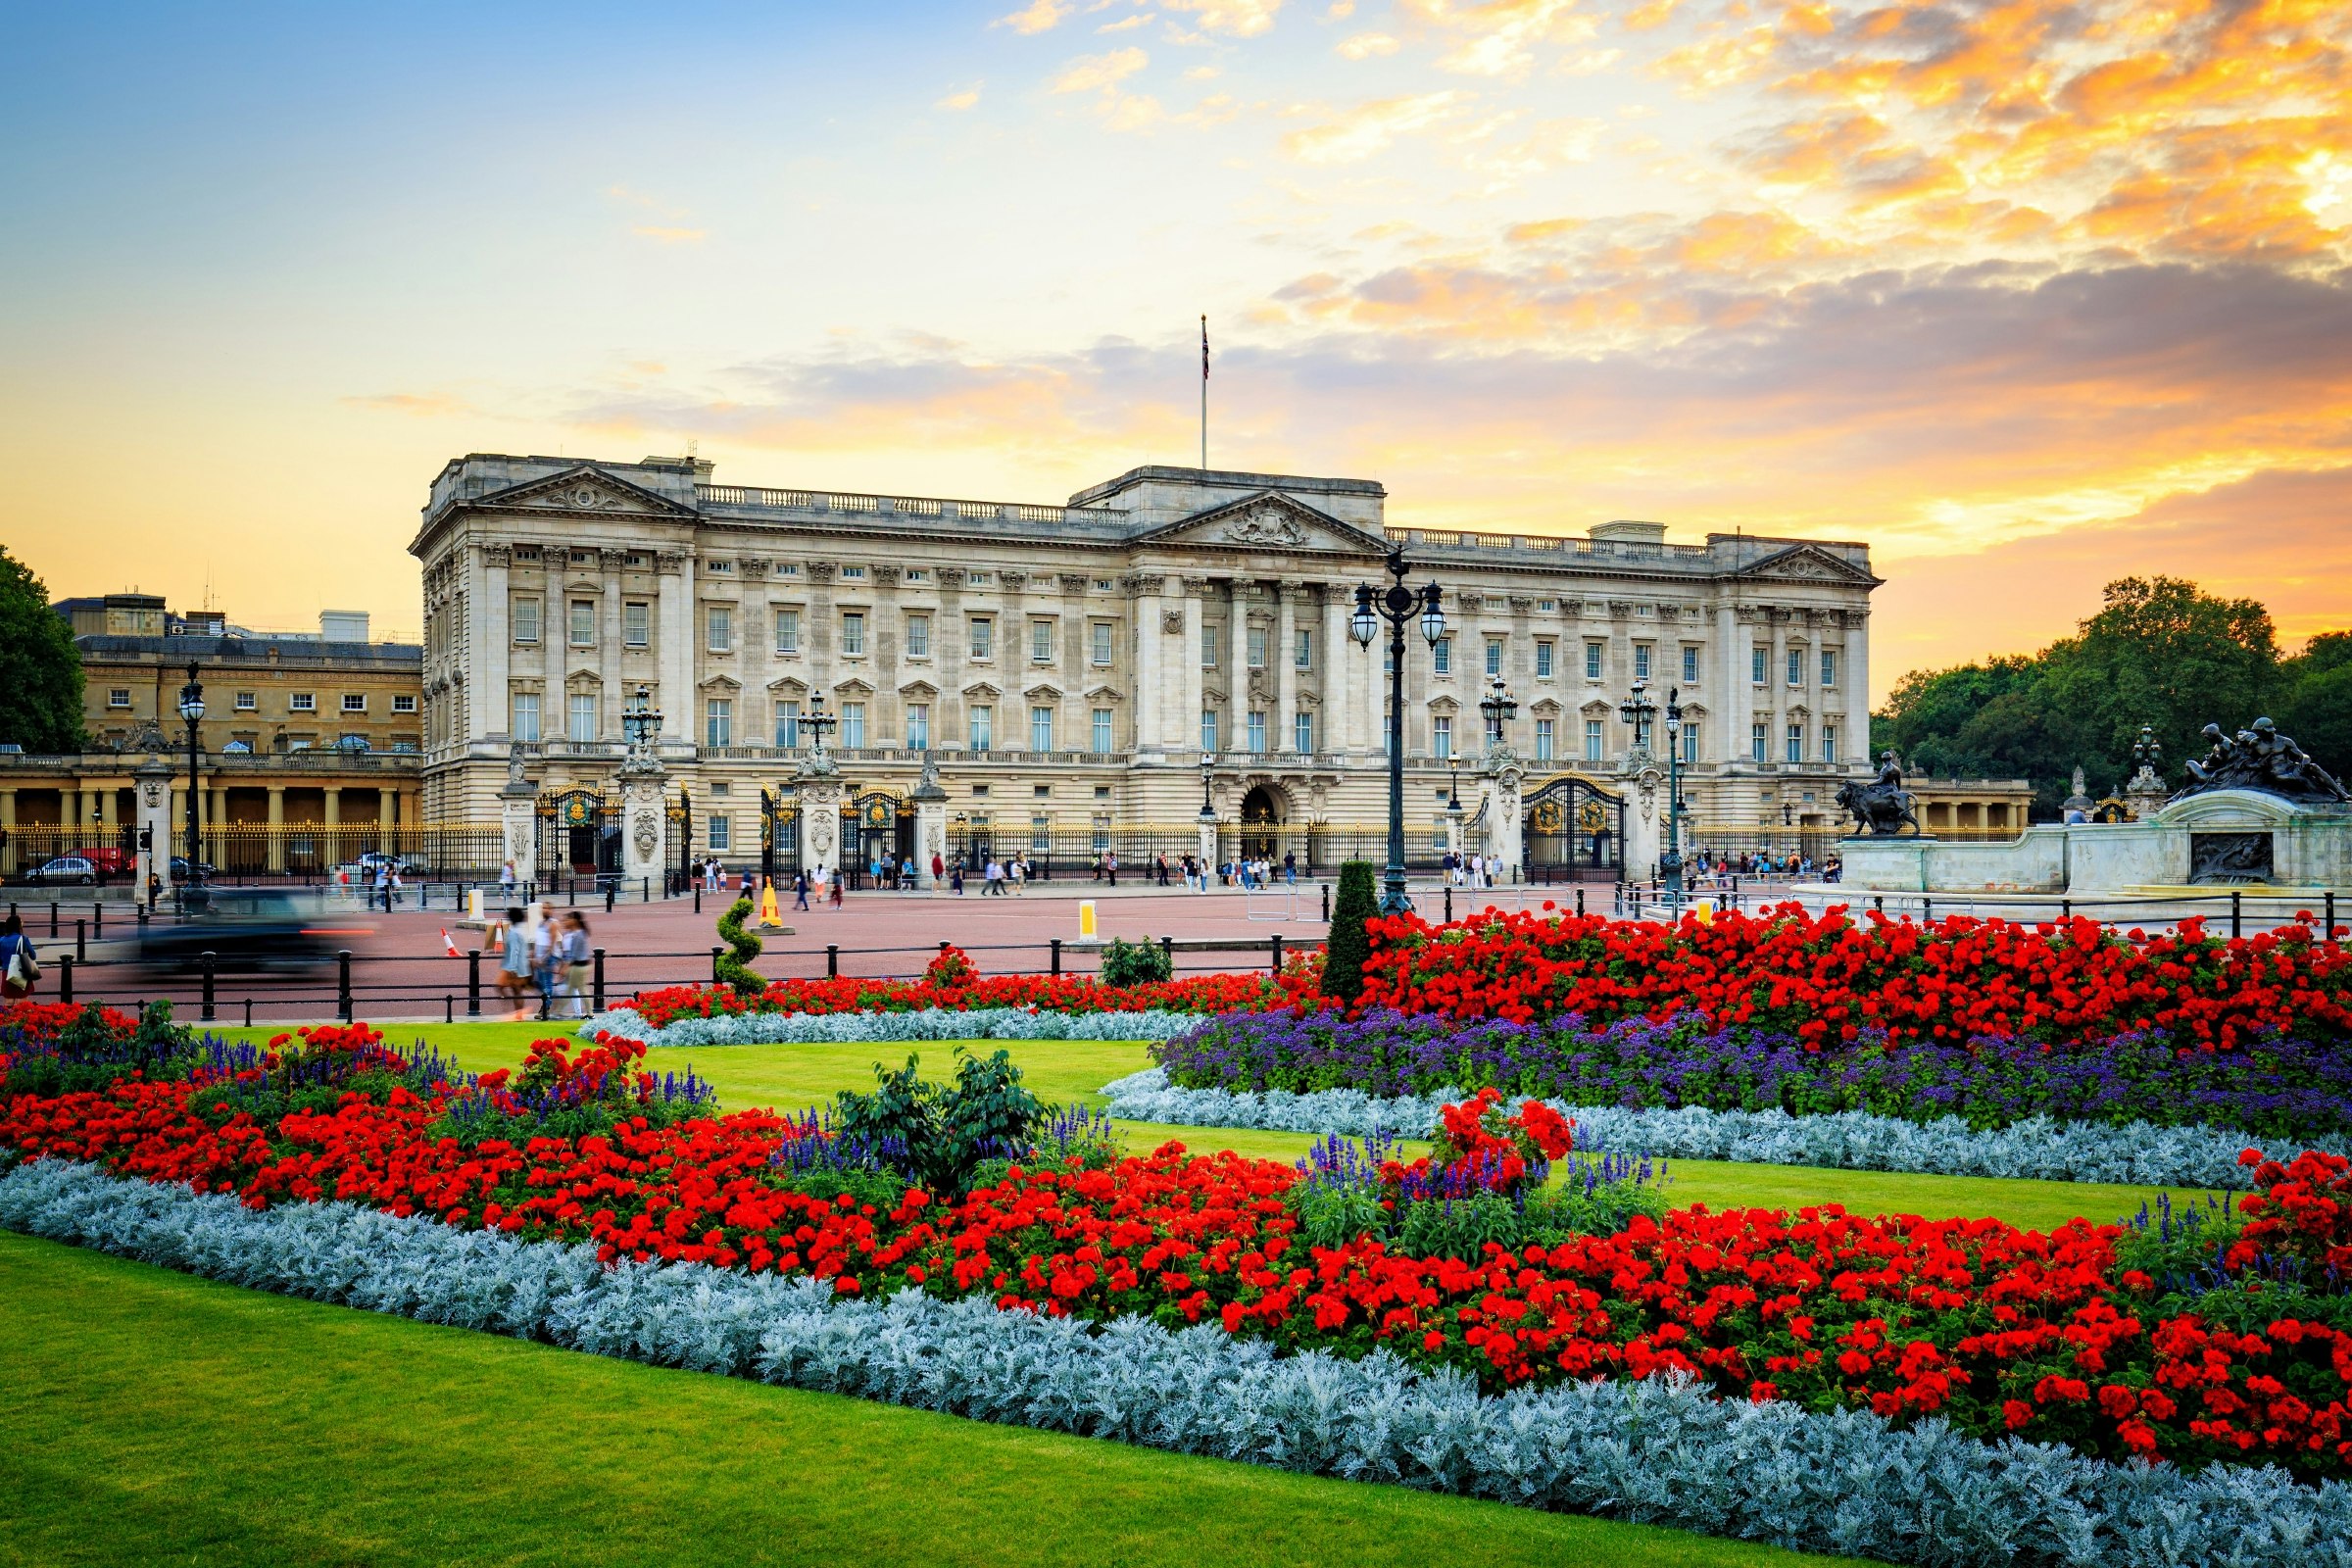 Colourful flowerbeds in front of Buckingham Palace in London